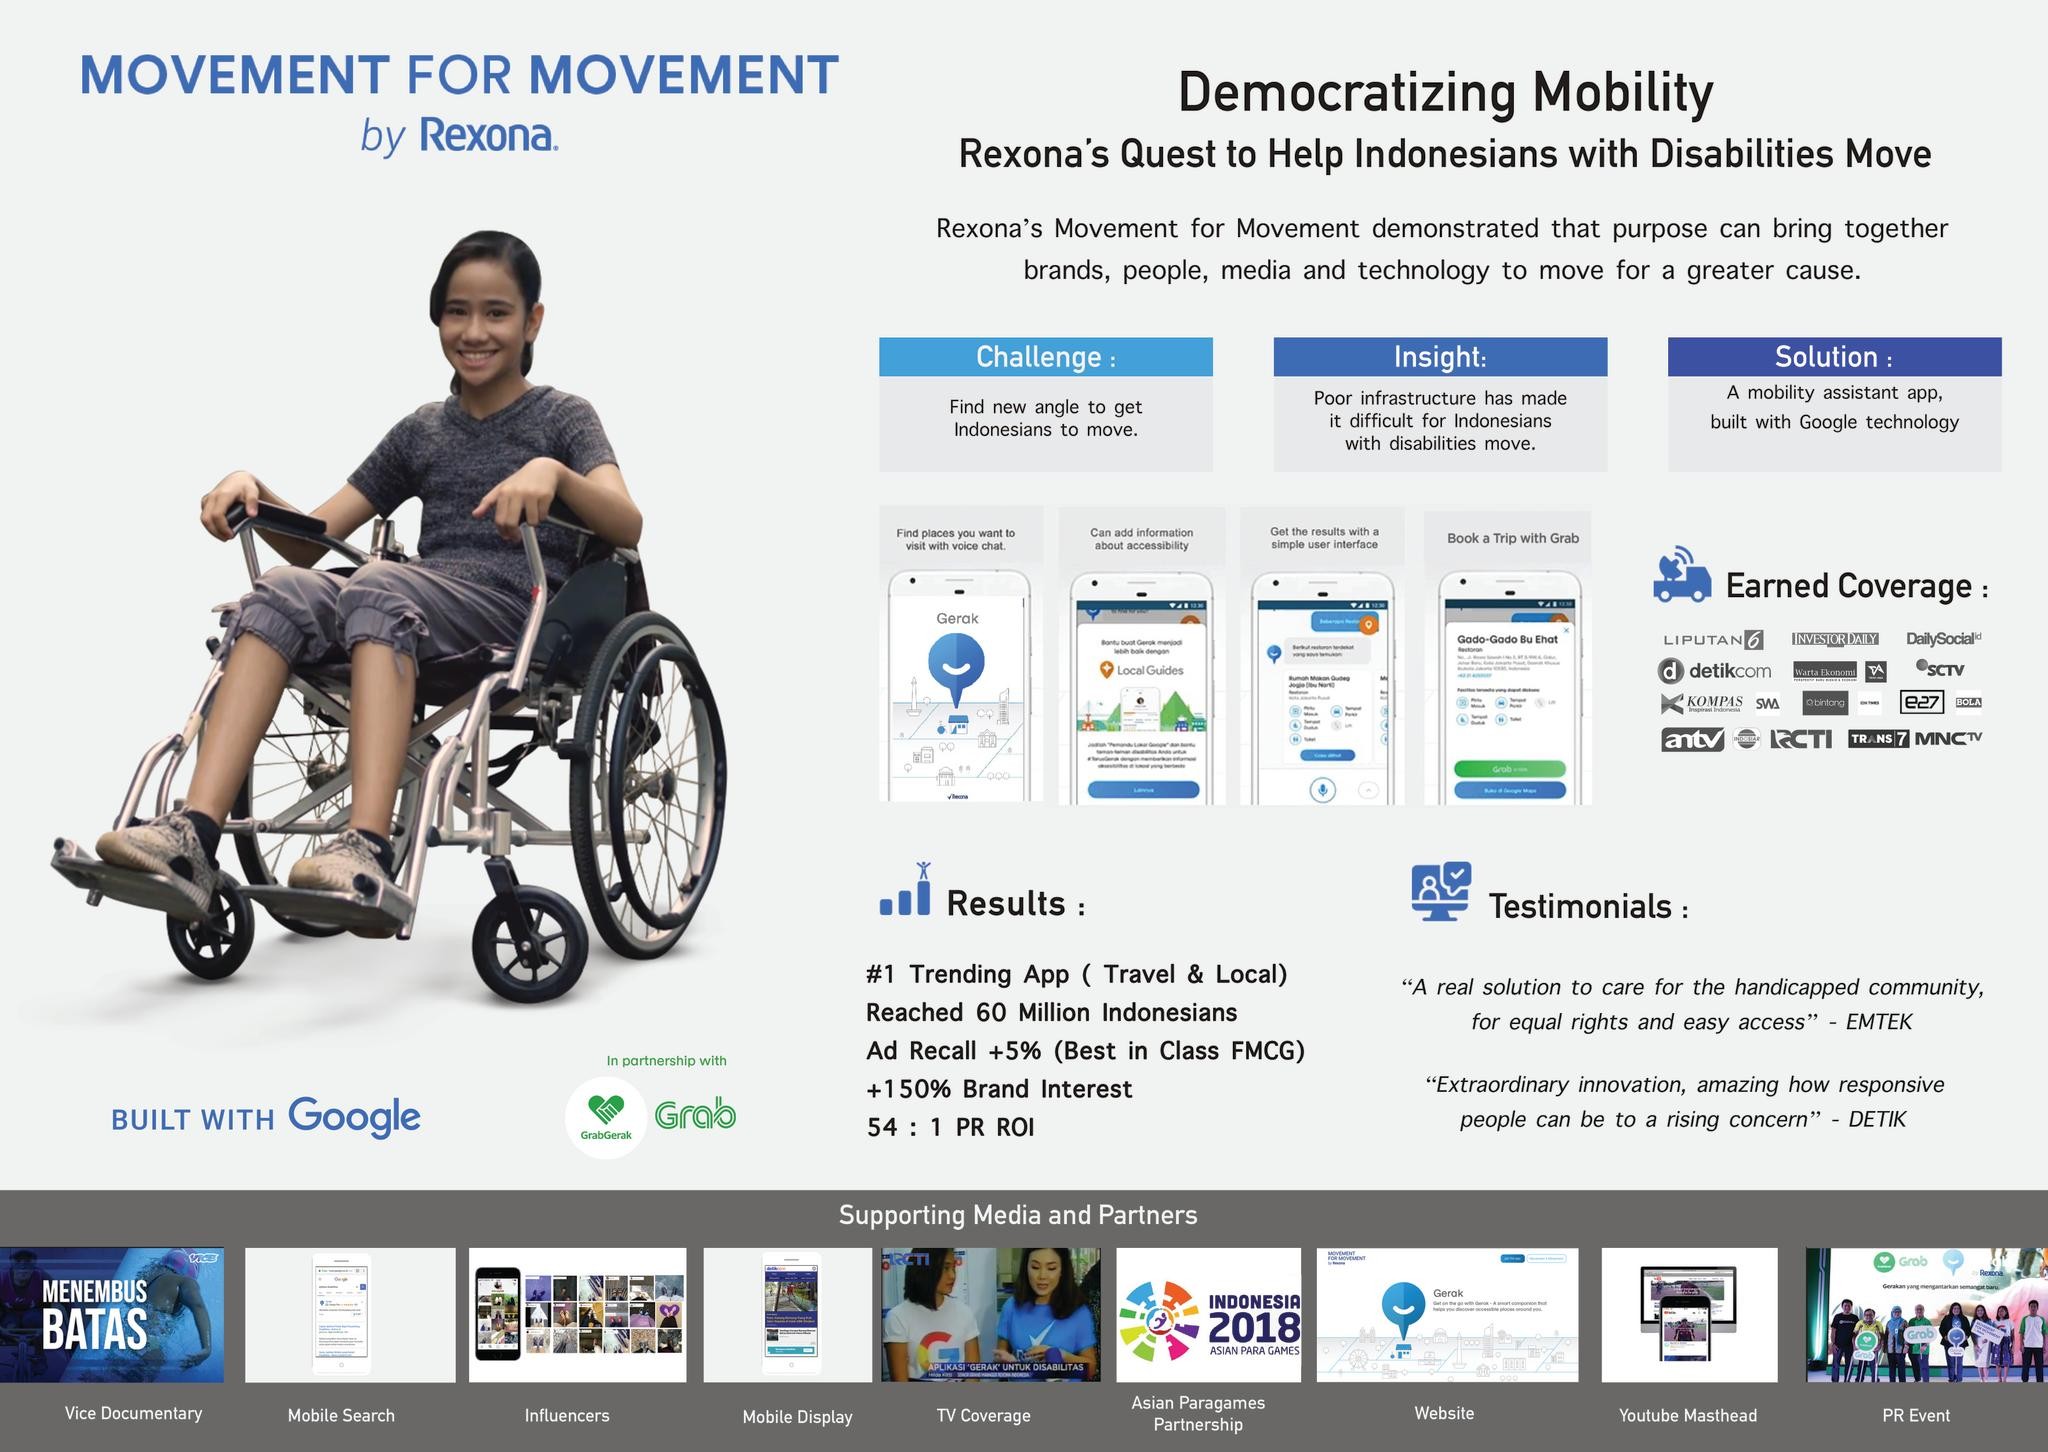 Gerak: Bringing Disabilities to the Forefront